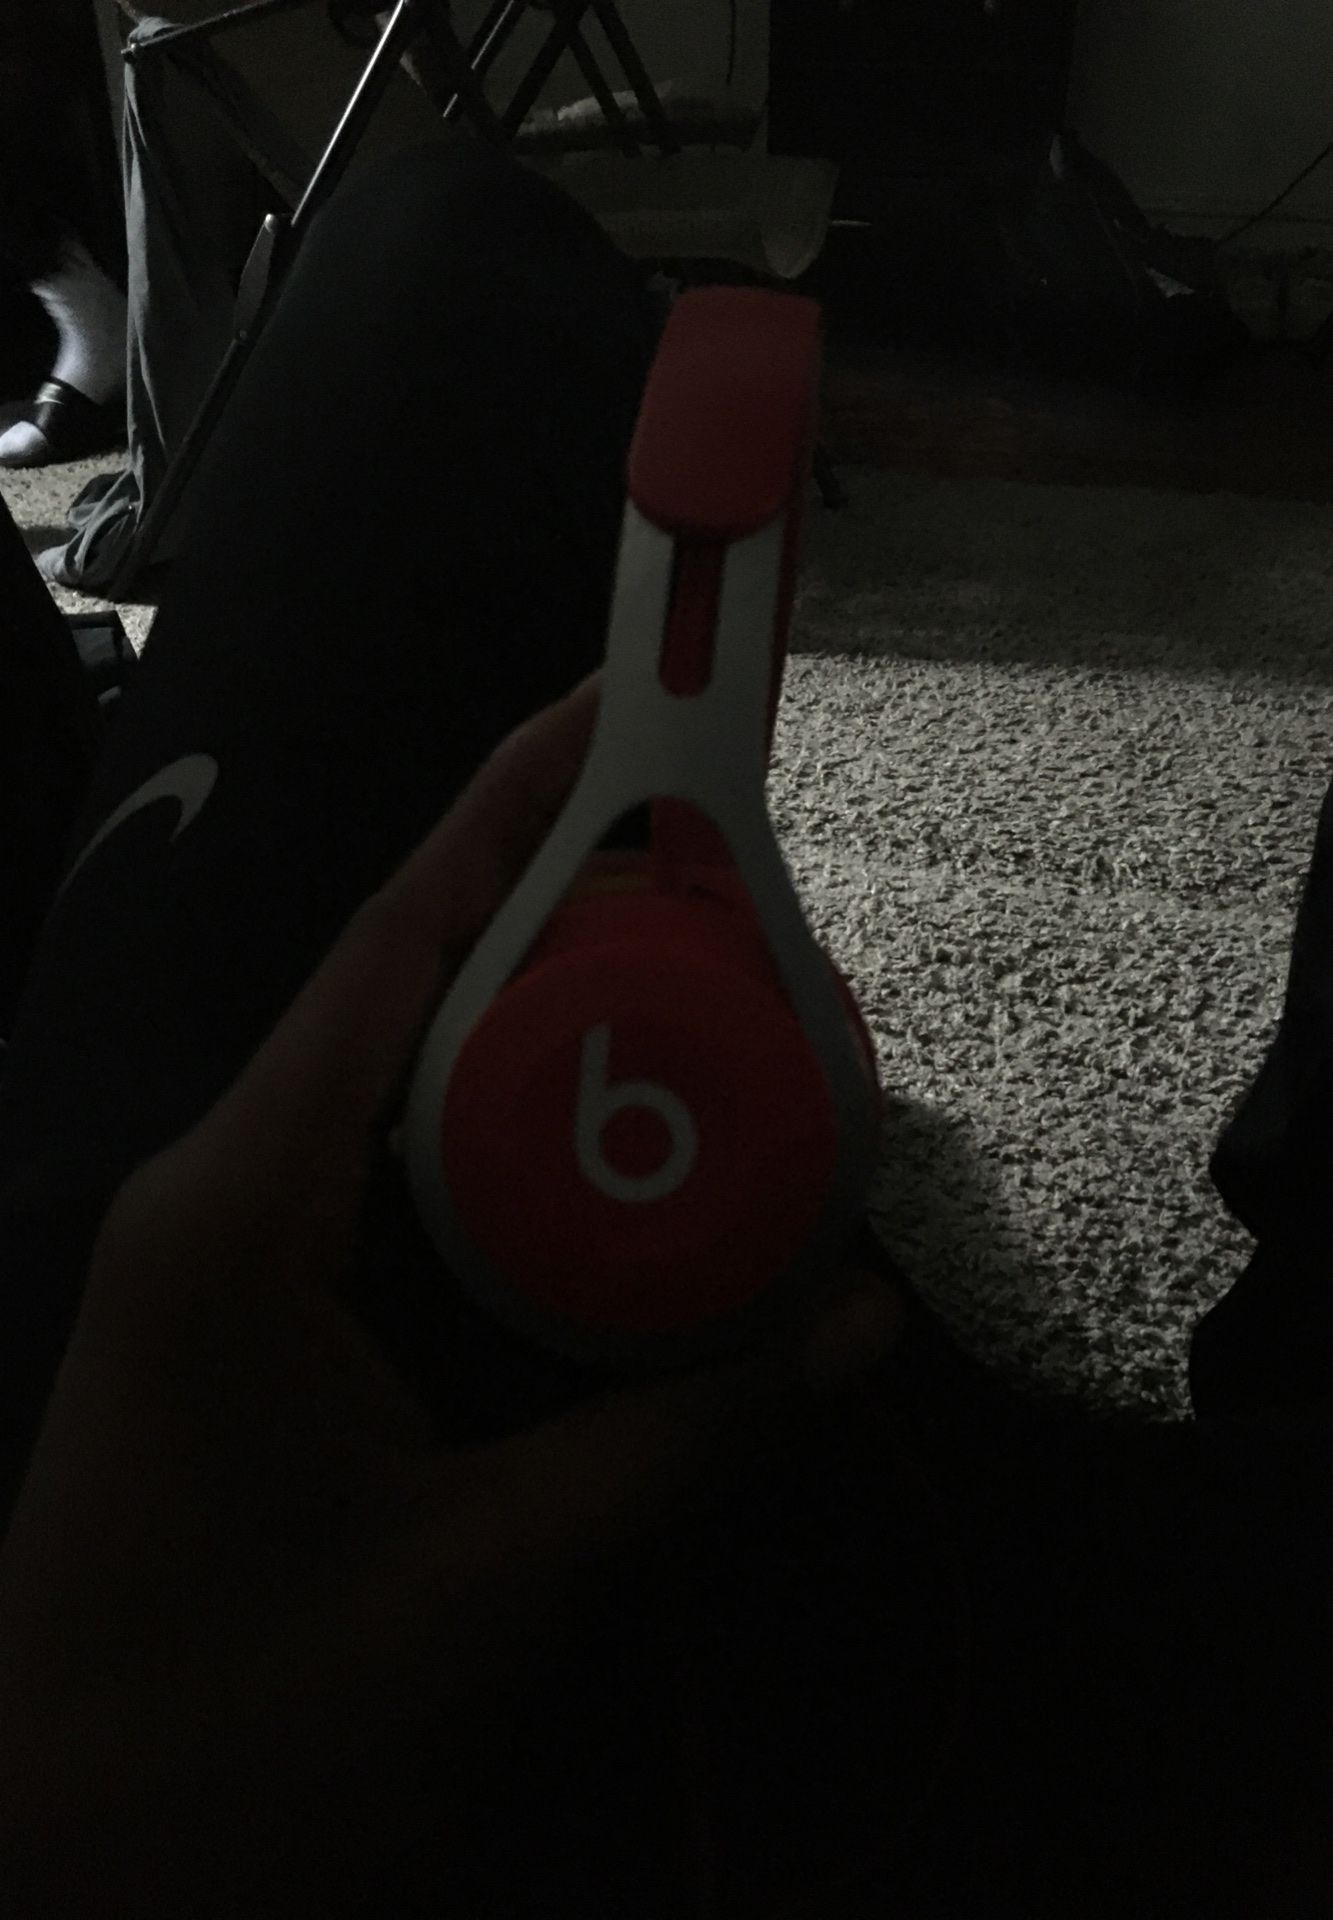 Beats ready for your service come get them